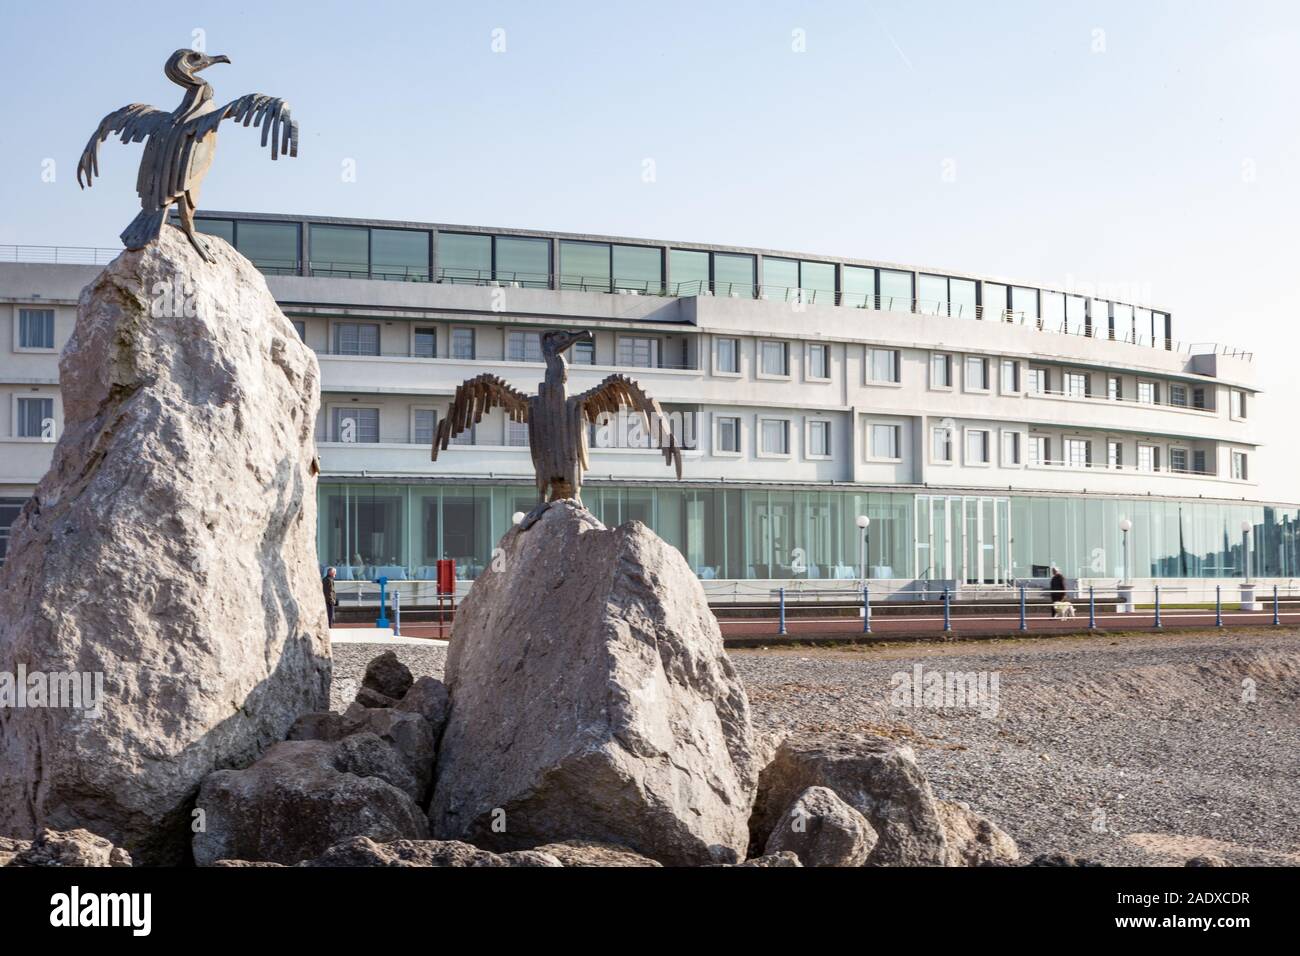 Morecambe Cormorant Sculptures. On the Stone Jetty in the Lancashire seaside town with the promenade and Art Deco Midland Hotel behind. Stock Photo